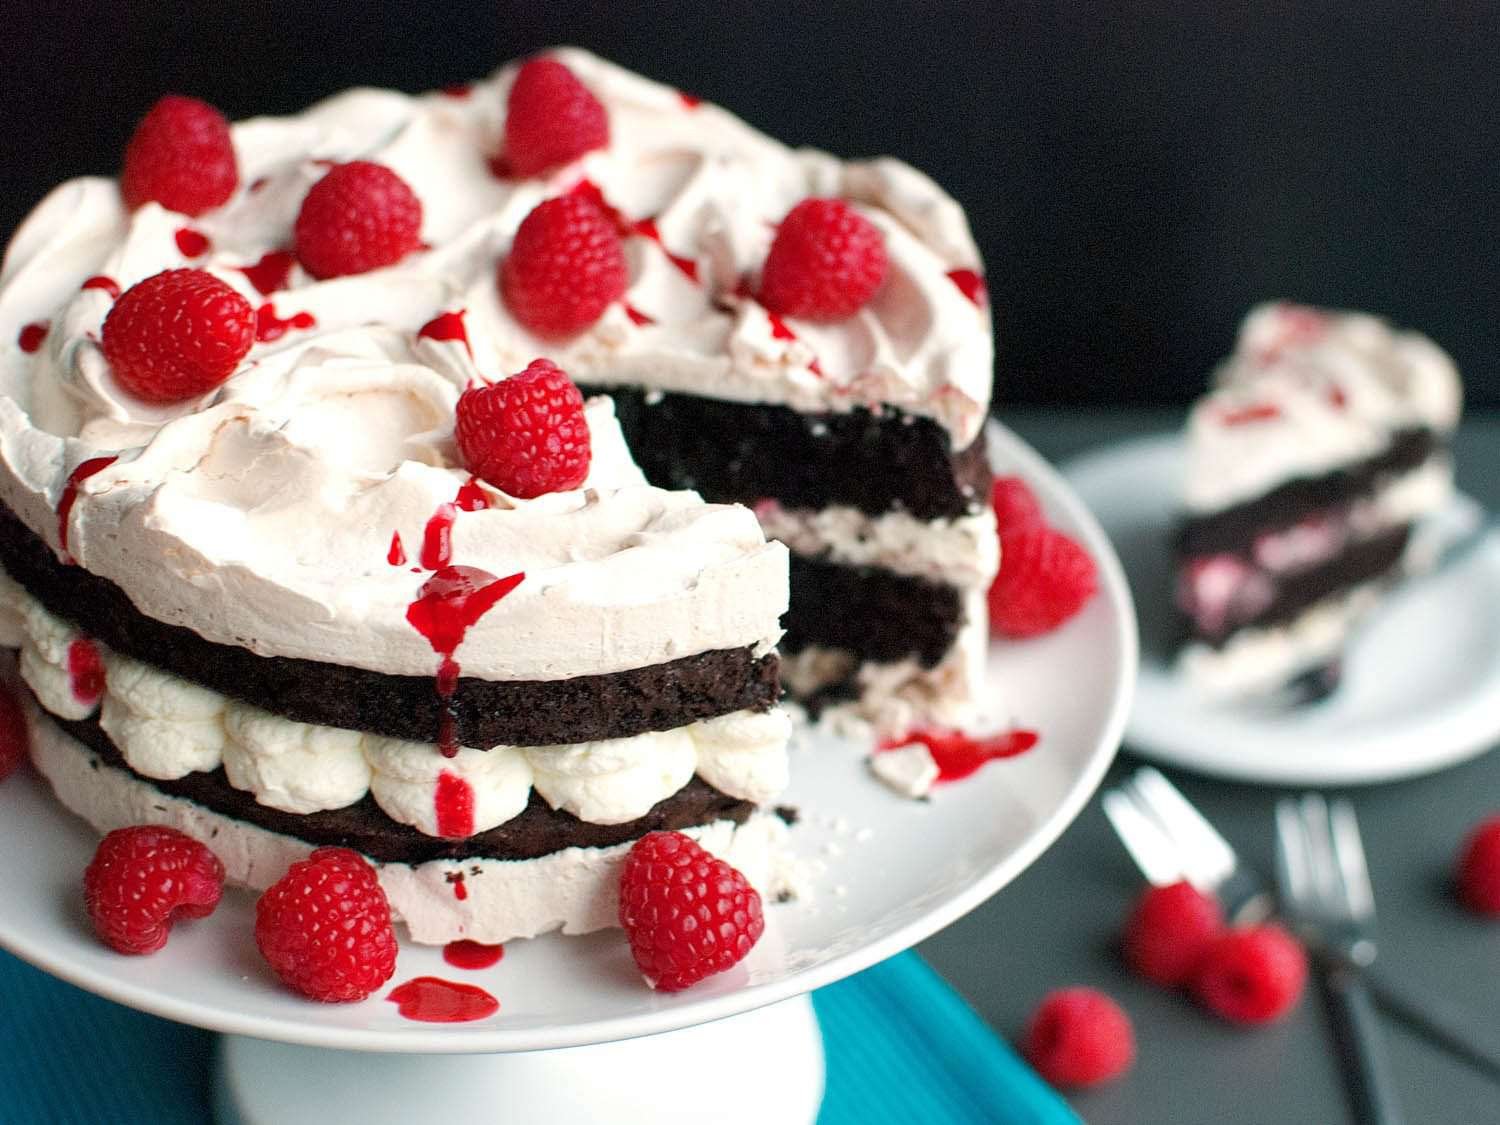 32 Chocolate Dessert Recipes for a Sweet Valentine’s Day